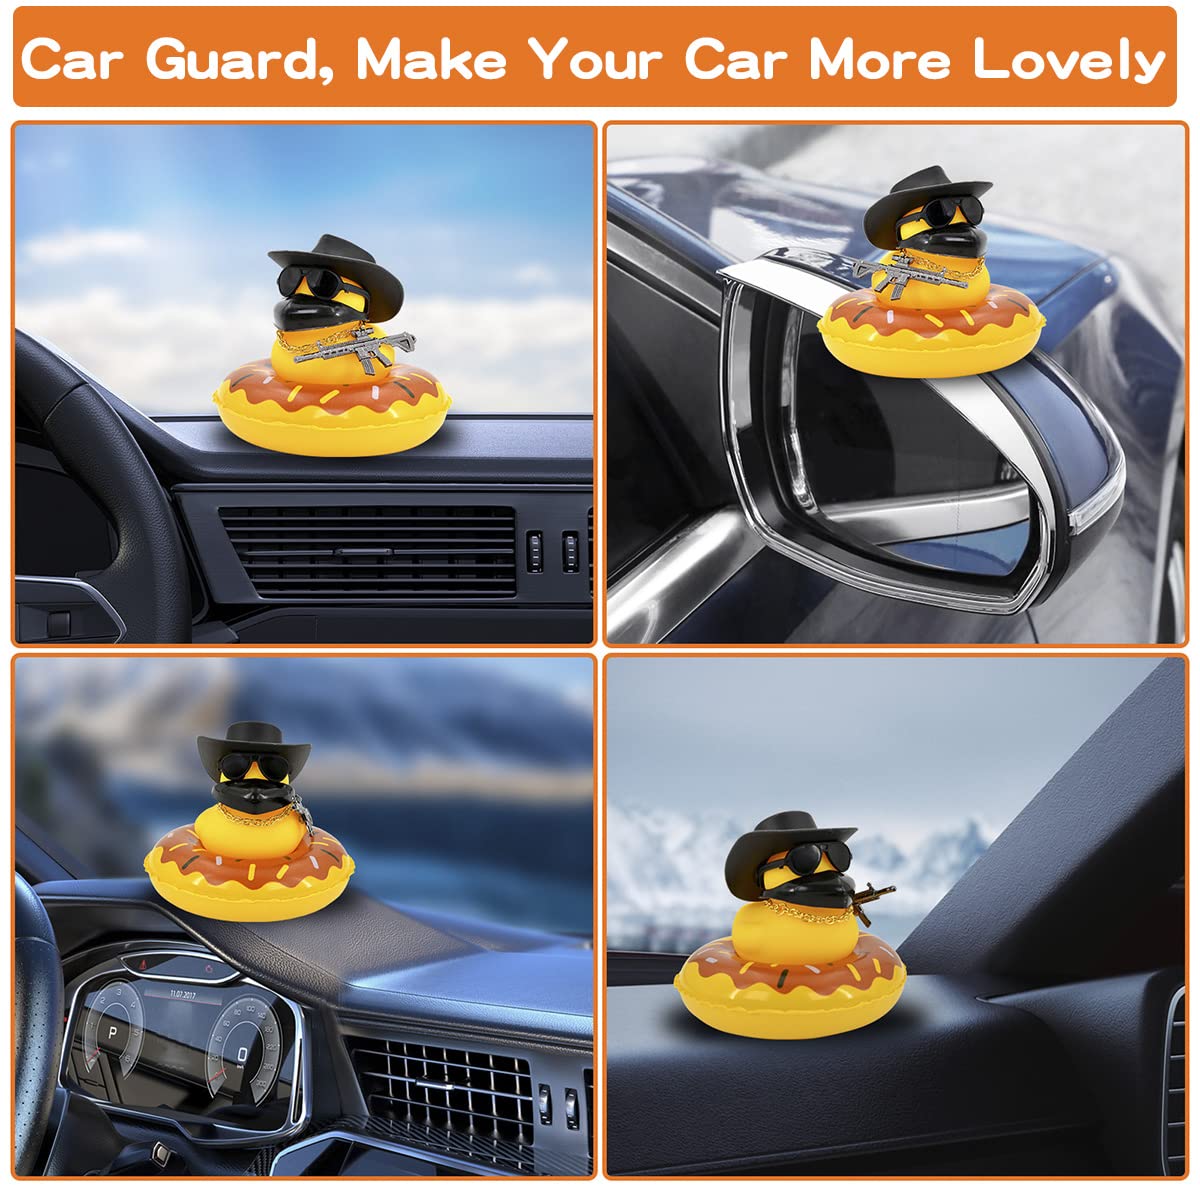 Car Duck Decoration Dashboard - Rubber Duck Toy Car Ornament, Car Accessories Duck with Mini Sun Hat Swim Ring Necklace and Sunglasses for Party Favors, Birthdays, Bath Time, Blue Sun Hat